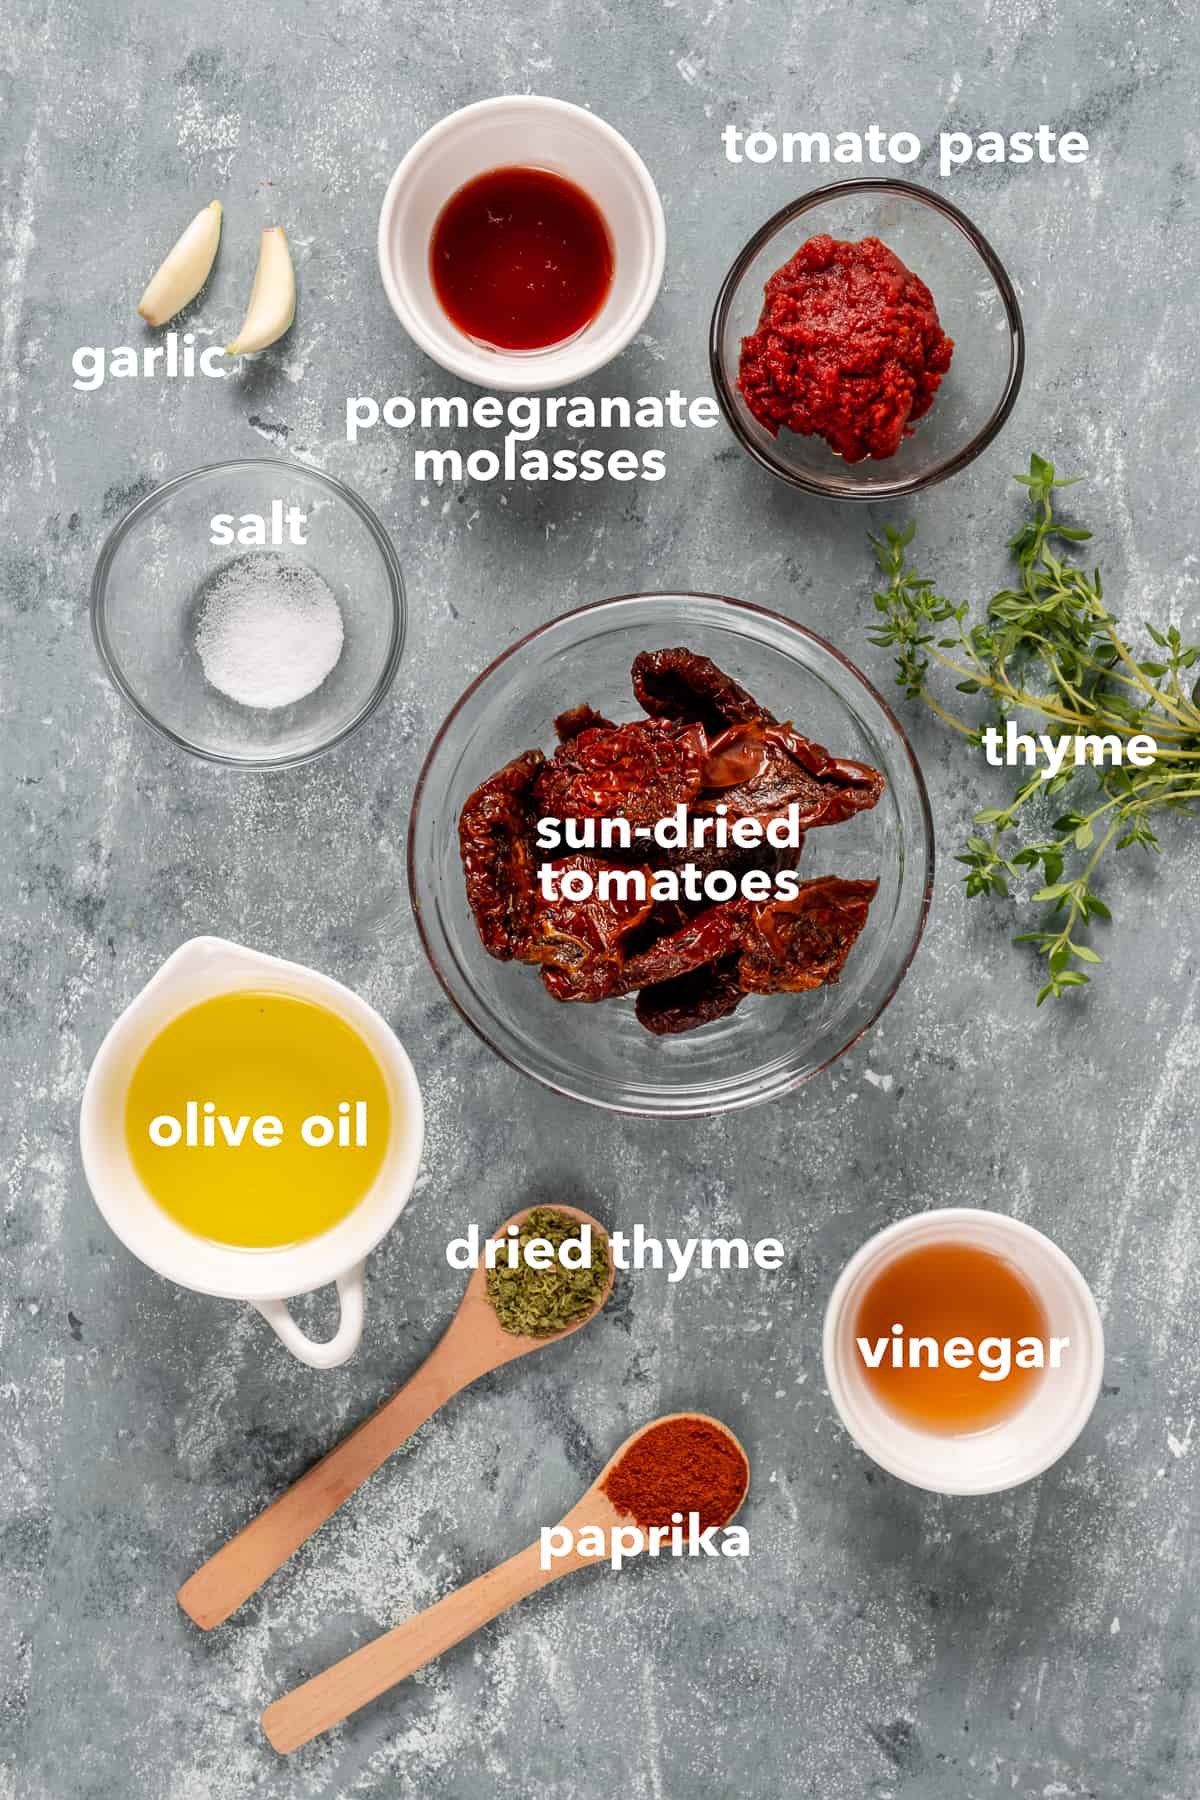 Sun dried tomatoes, tomato paste, pomegranate molasses, olive oil, vinegar, spices, garlic and fresh thyme are on a grey background.